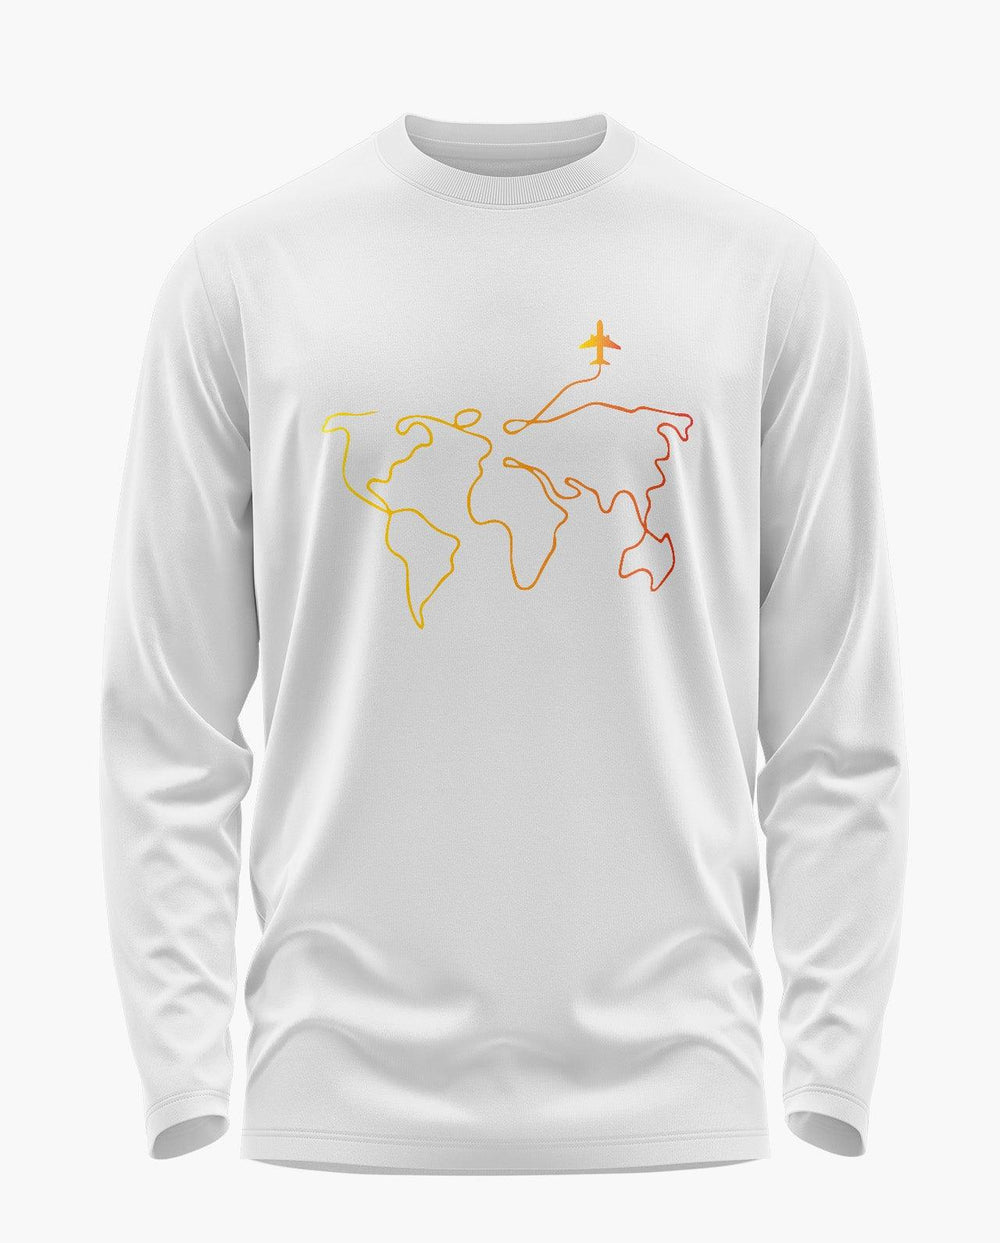 Travelling around the earth Full Sleeve T-Shirt - Aero Armour